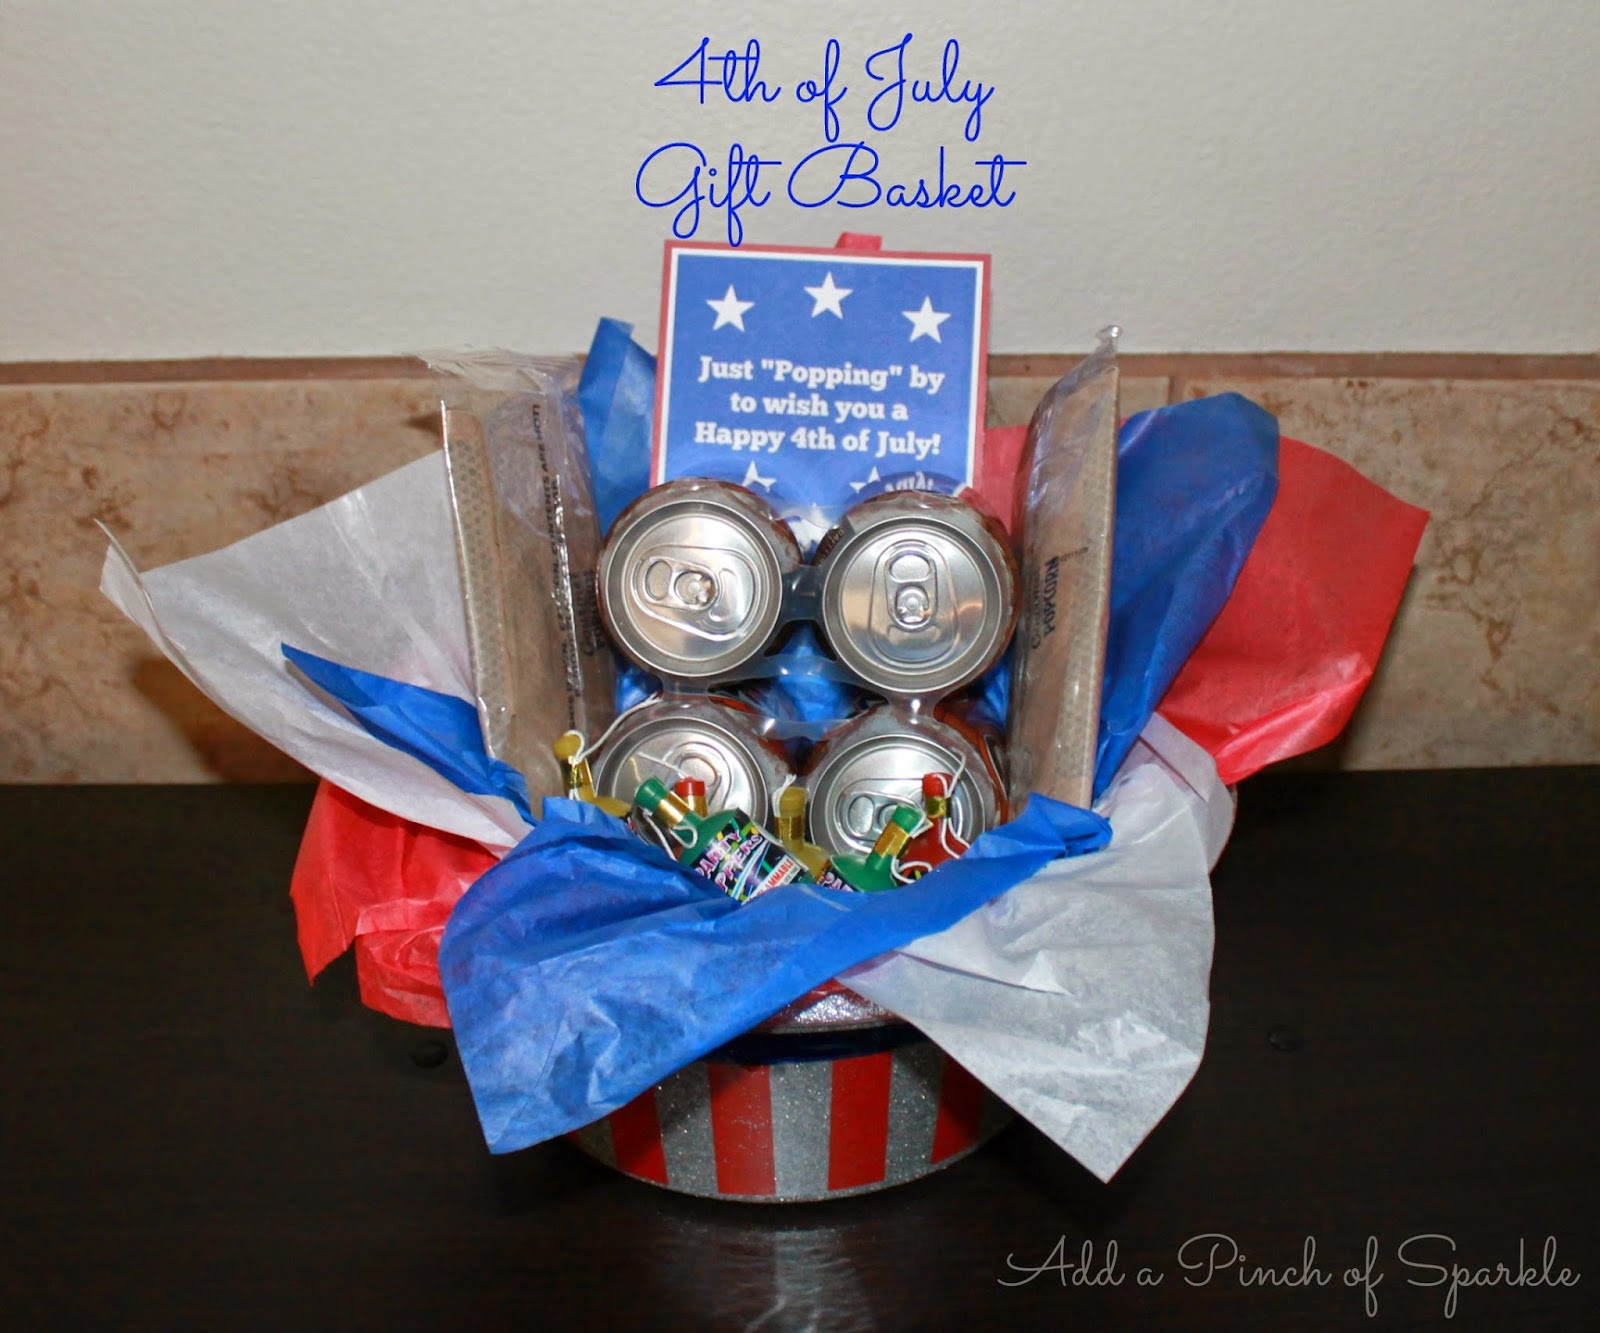 4th Of July Gift
 Add A Pinch Sparkle 4th of July Gift Basket